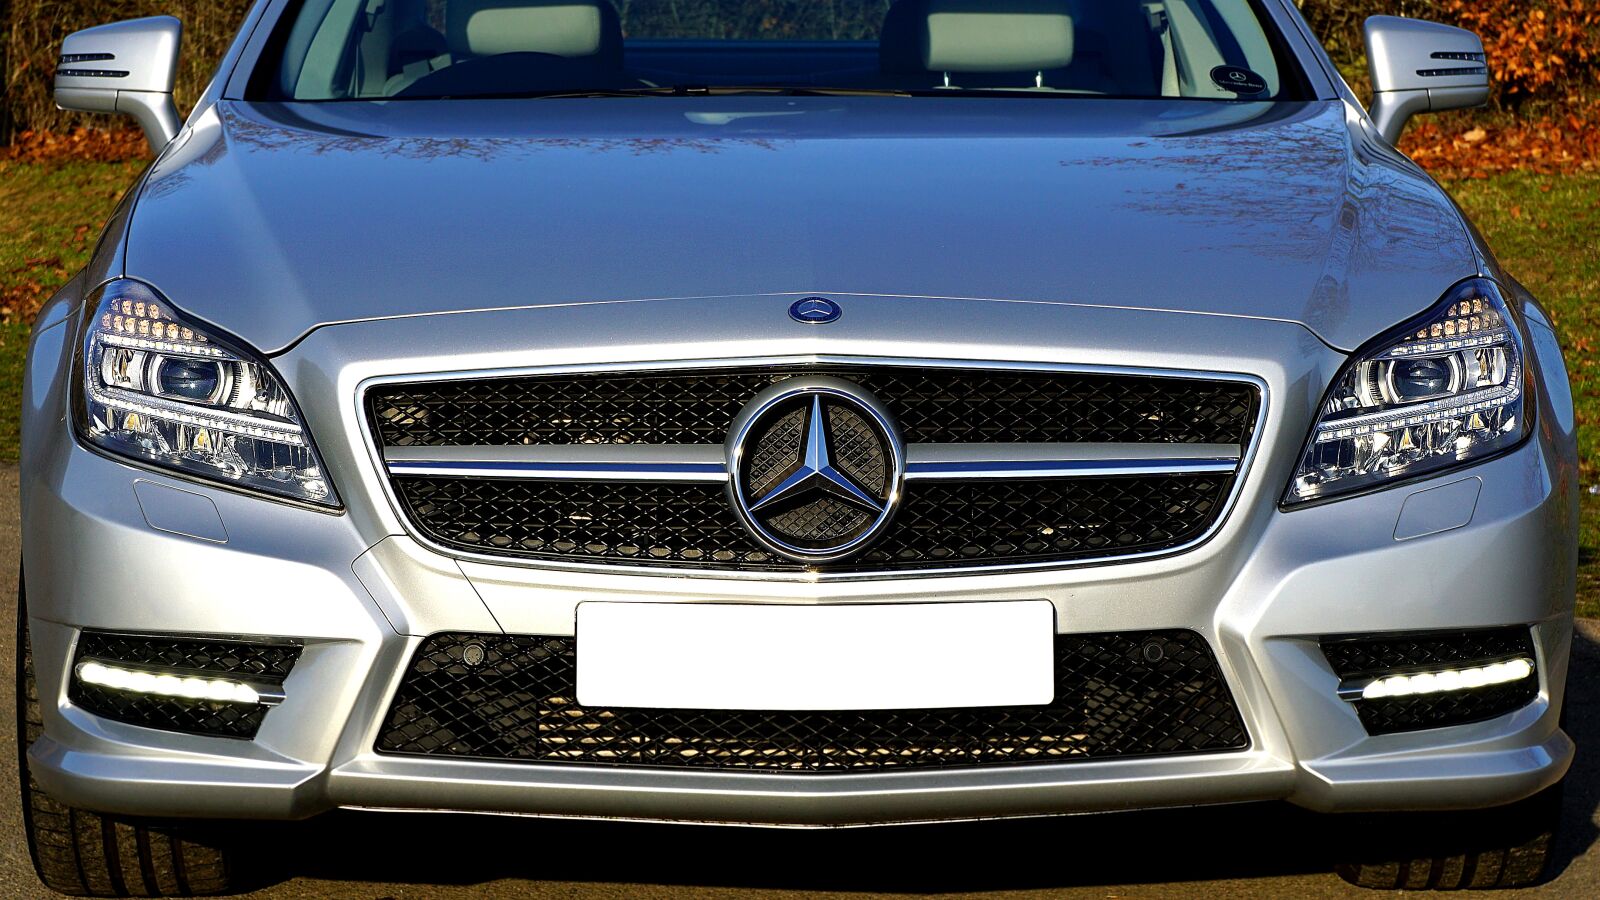 Sony a6000 sample photo. Mercedes-benz, car, transport photography